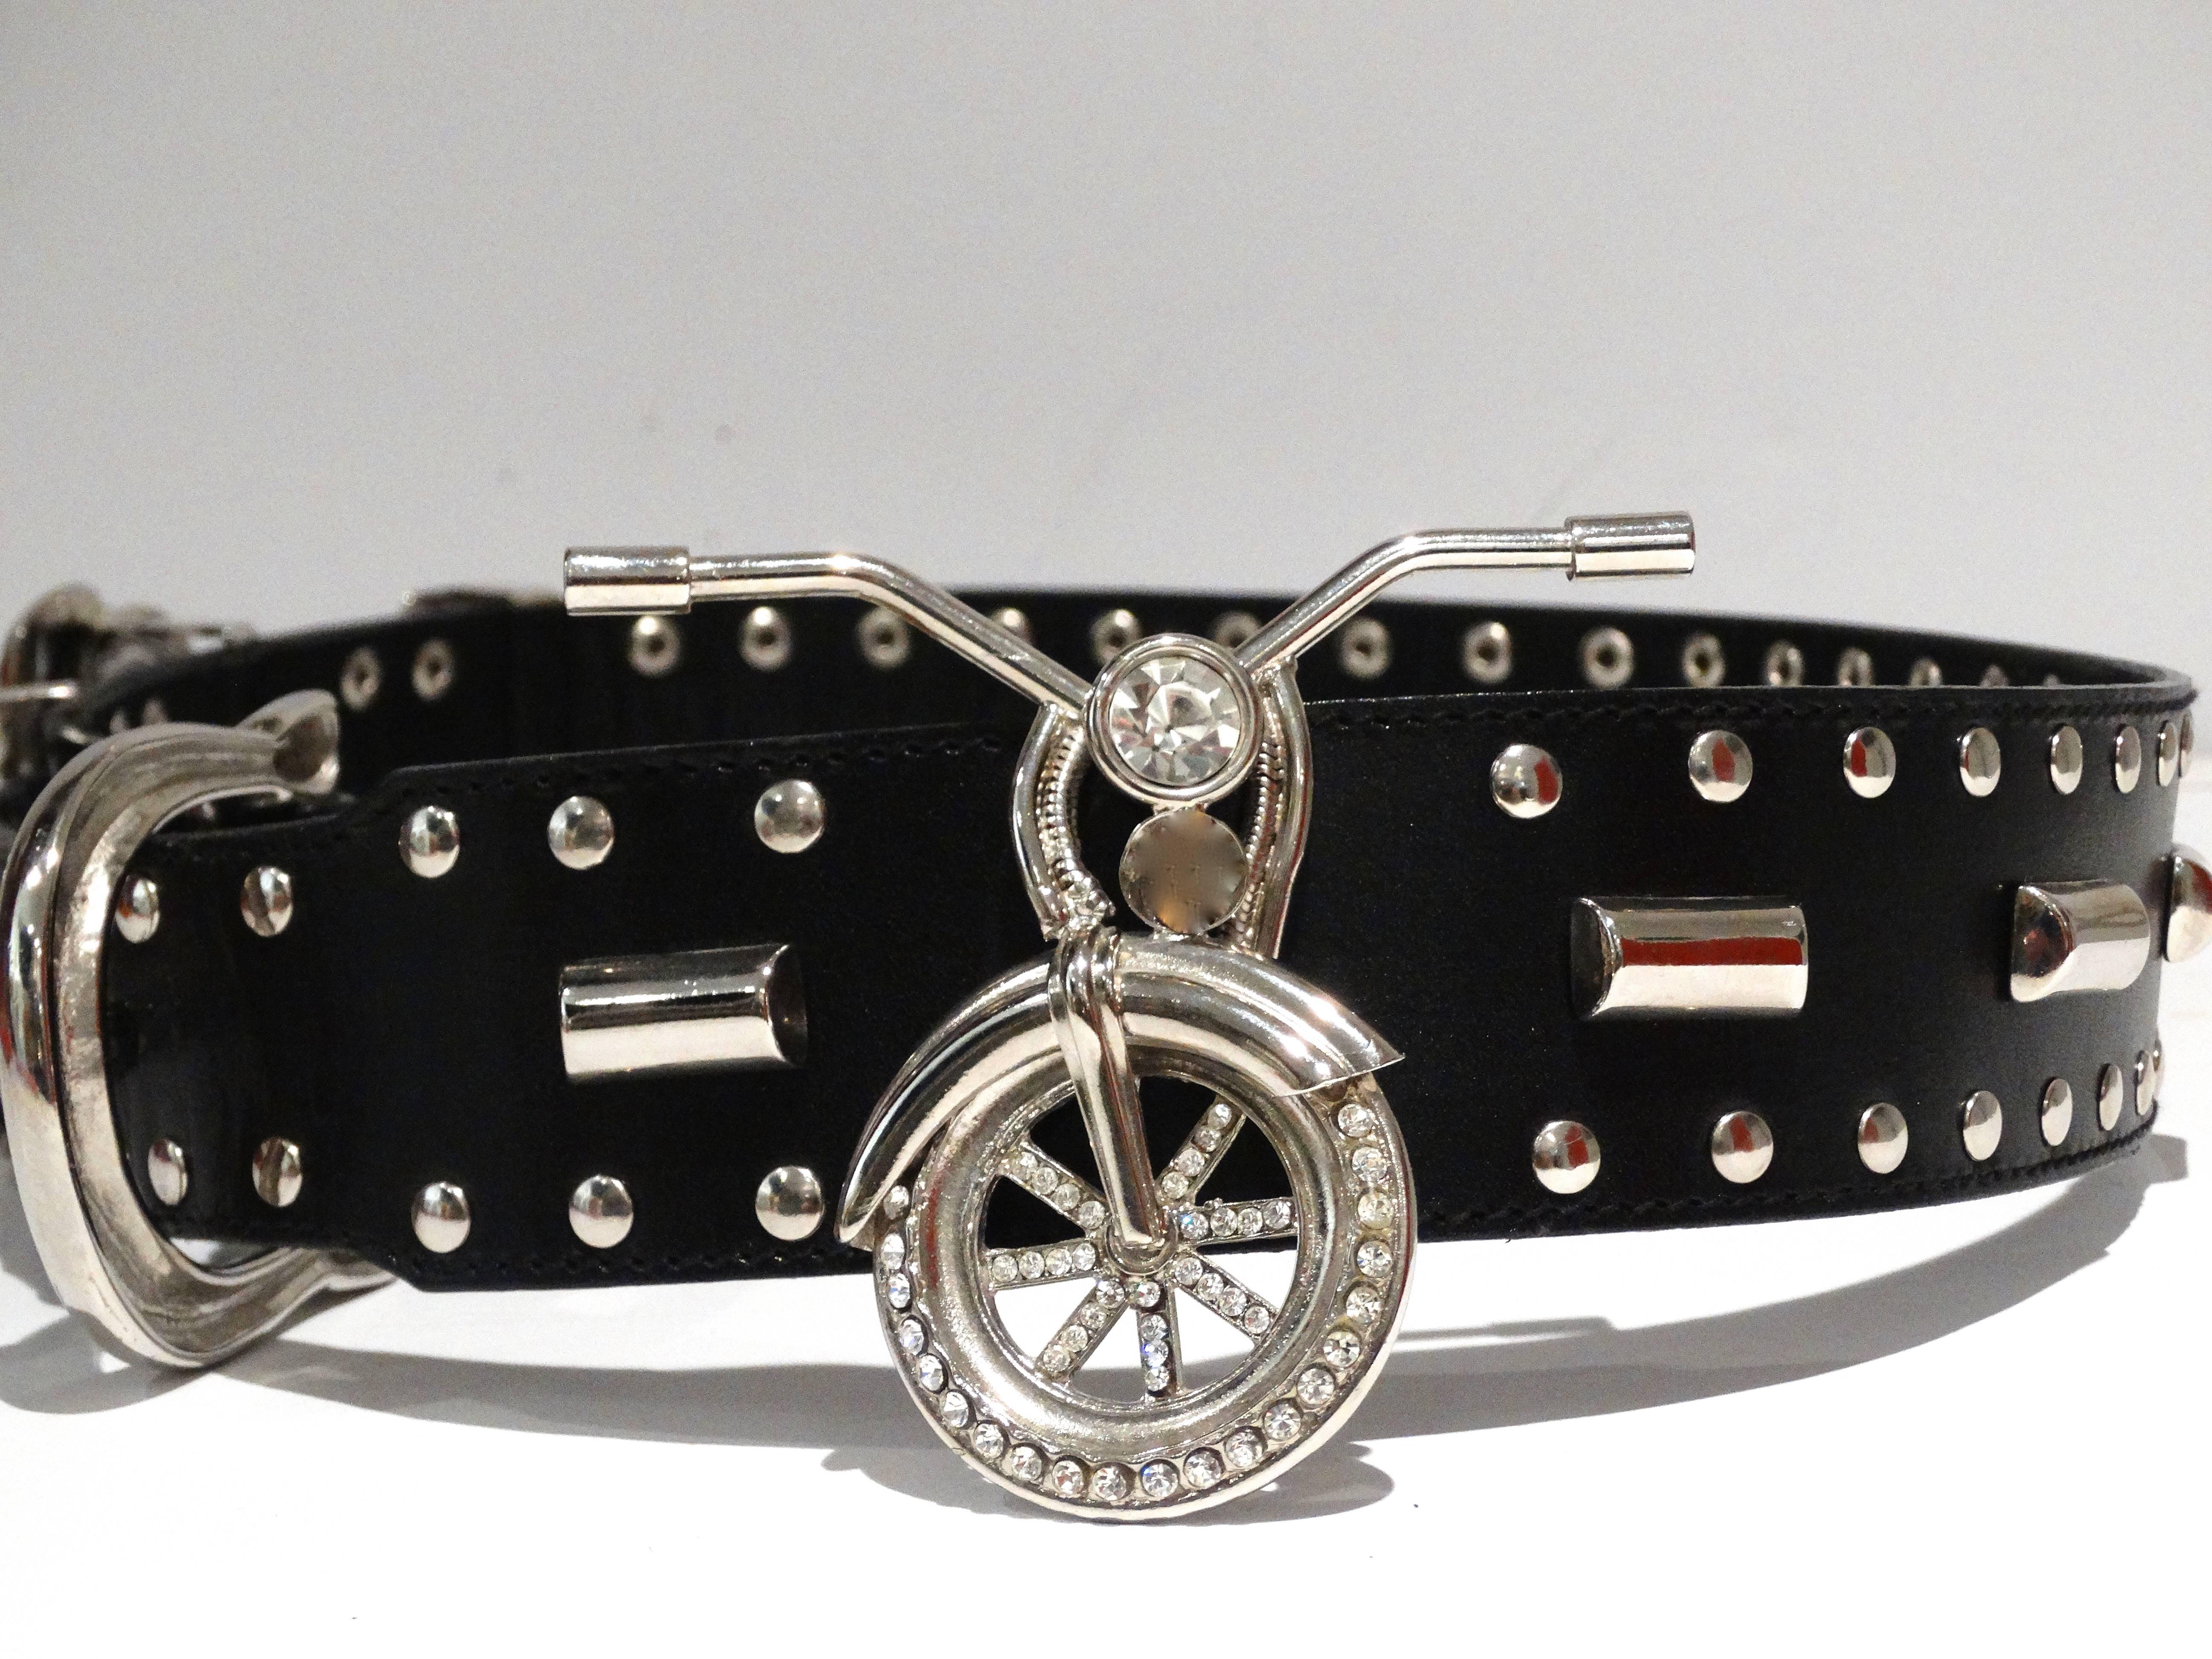 Iconic Gianni Versace mens Runway Motorcycle Belt size 85 Nickel heavy with featured Motorcycle parts with crystal details. Studded out with large buckle closure. Belt measures 39